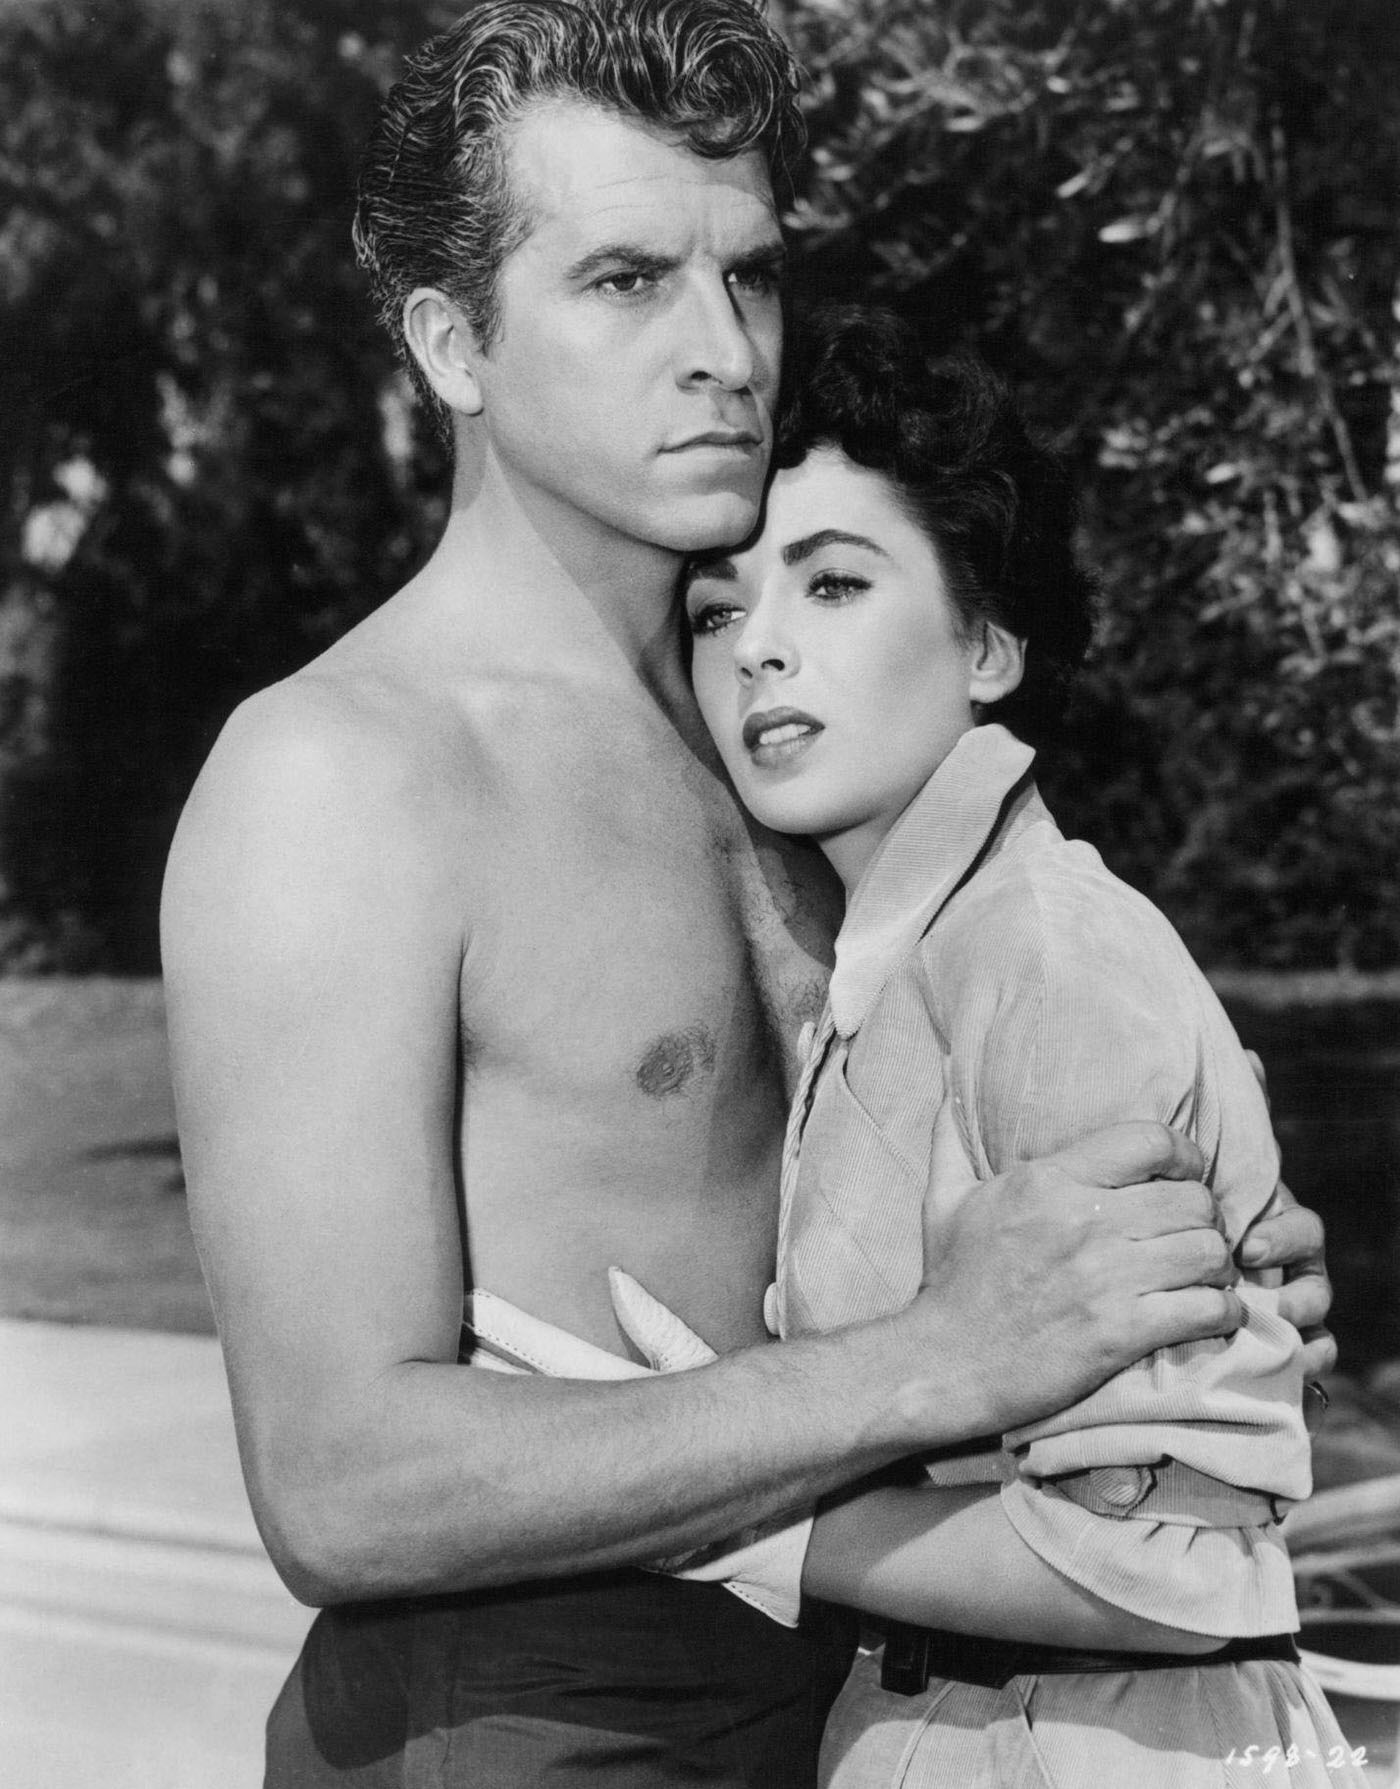 Fernando Lamas embraces Elizabeth Taylor in a scene from 'Girl Who Had Everything' (1953).